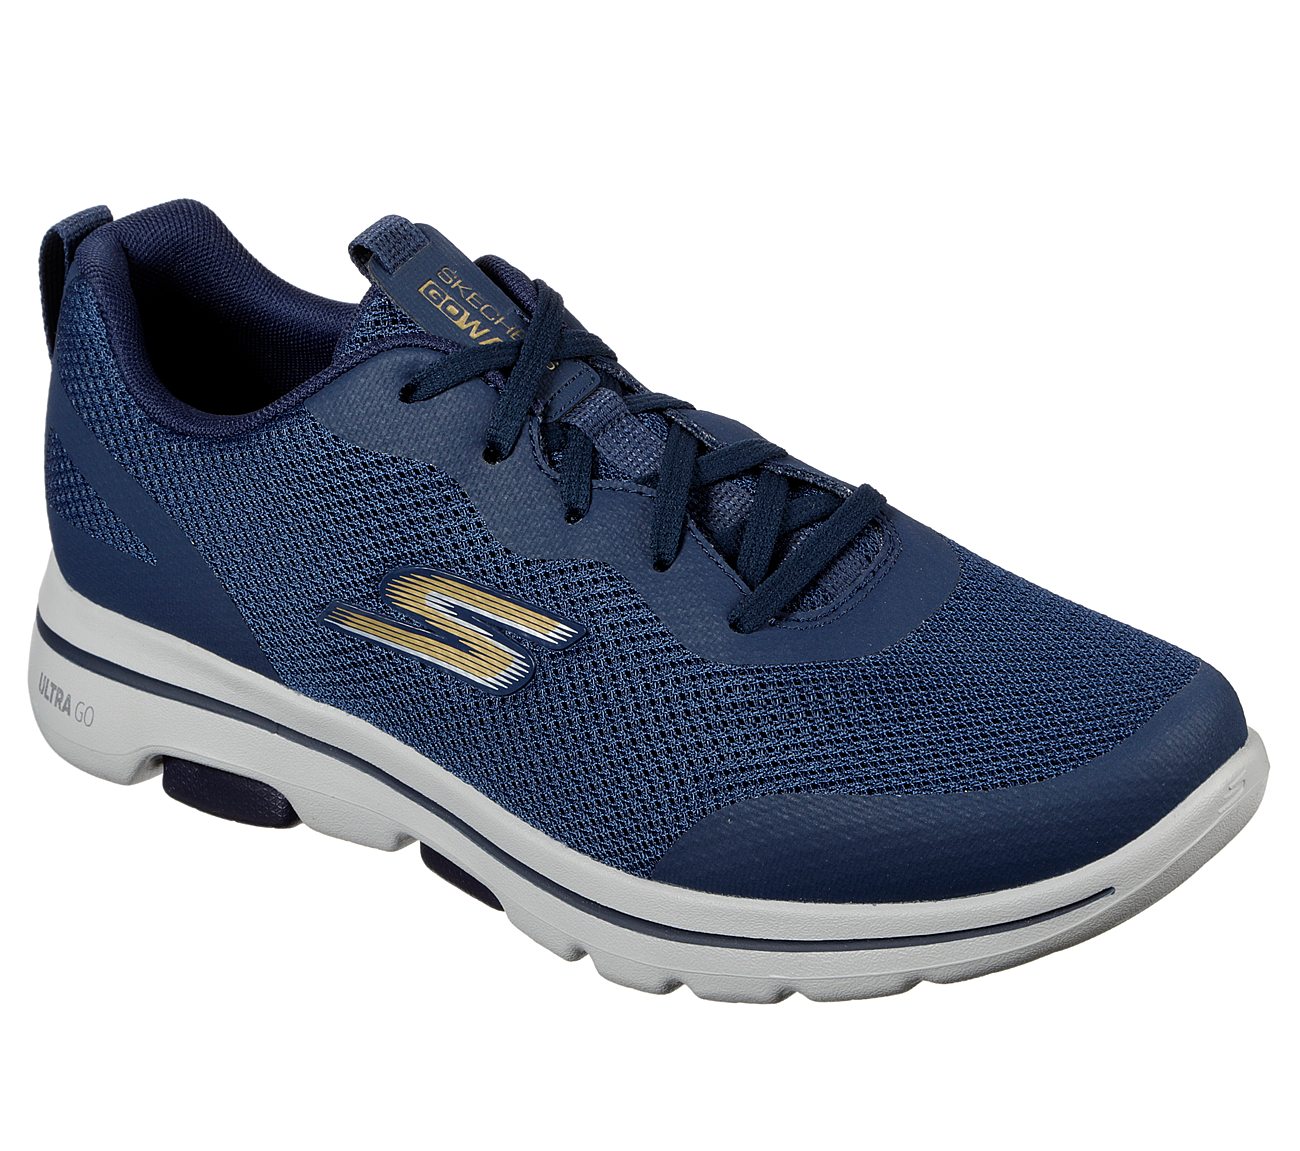 GO WALKS 5 SQUALL, NAVY/GOLD Footwear Lateral View